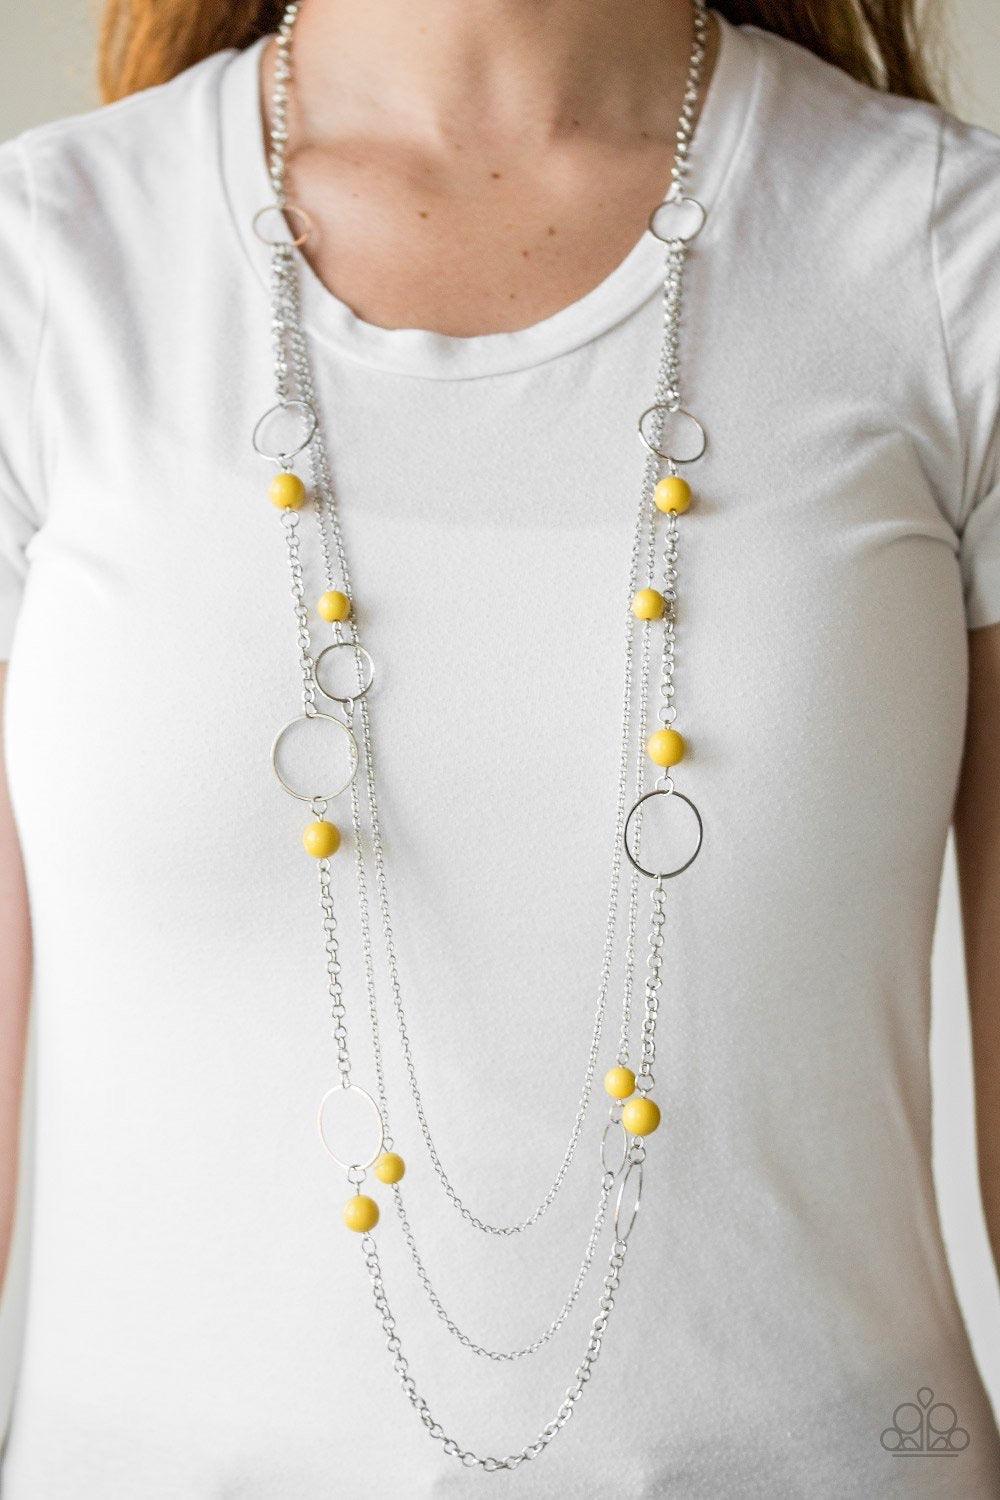 Paparazzi Accessories Beachside Babe - Yellow Featuring hearty yellow beads and shimmery silver hoops, mismatched silver chains layer down the chest for a seasonal look. Features an adjustable clasp closure. Jewelry